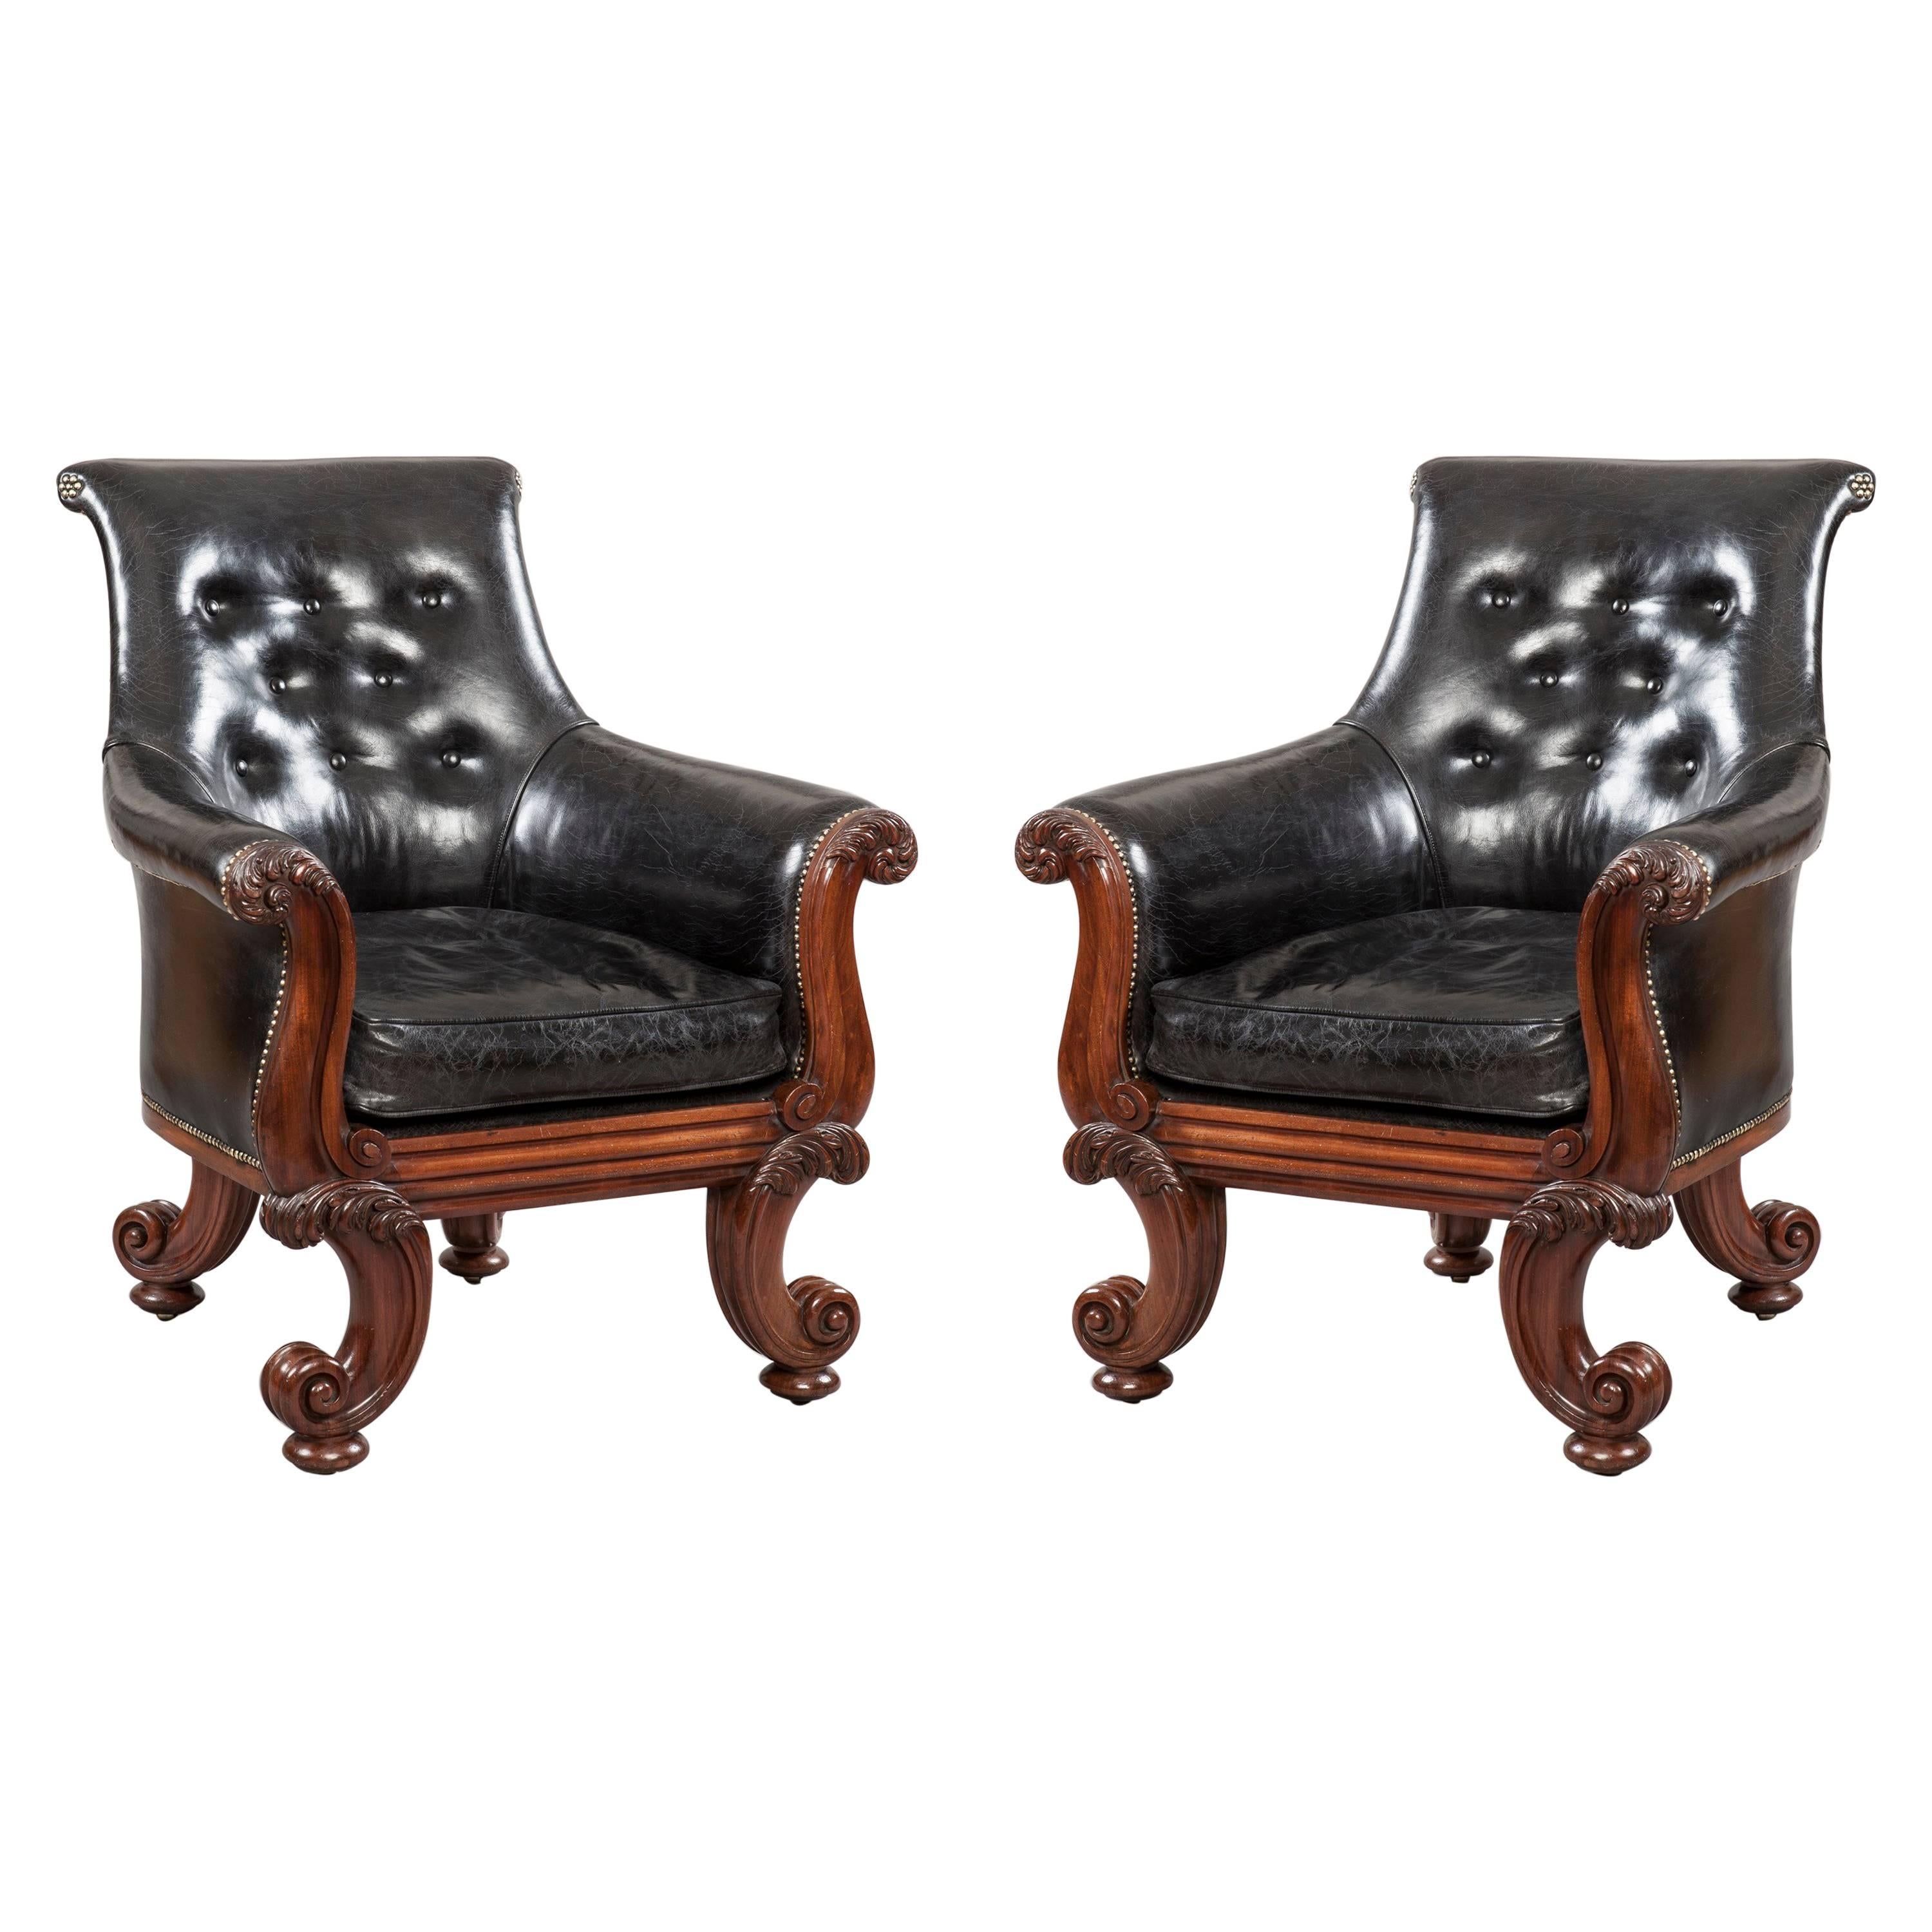 Pair of 19th Century English "C" Scroll Black Leather Library Armchairs